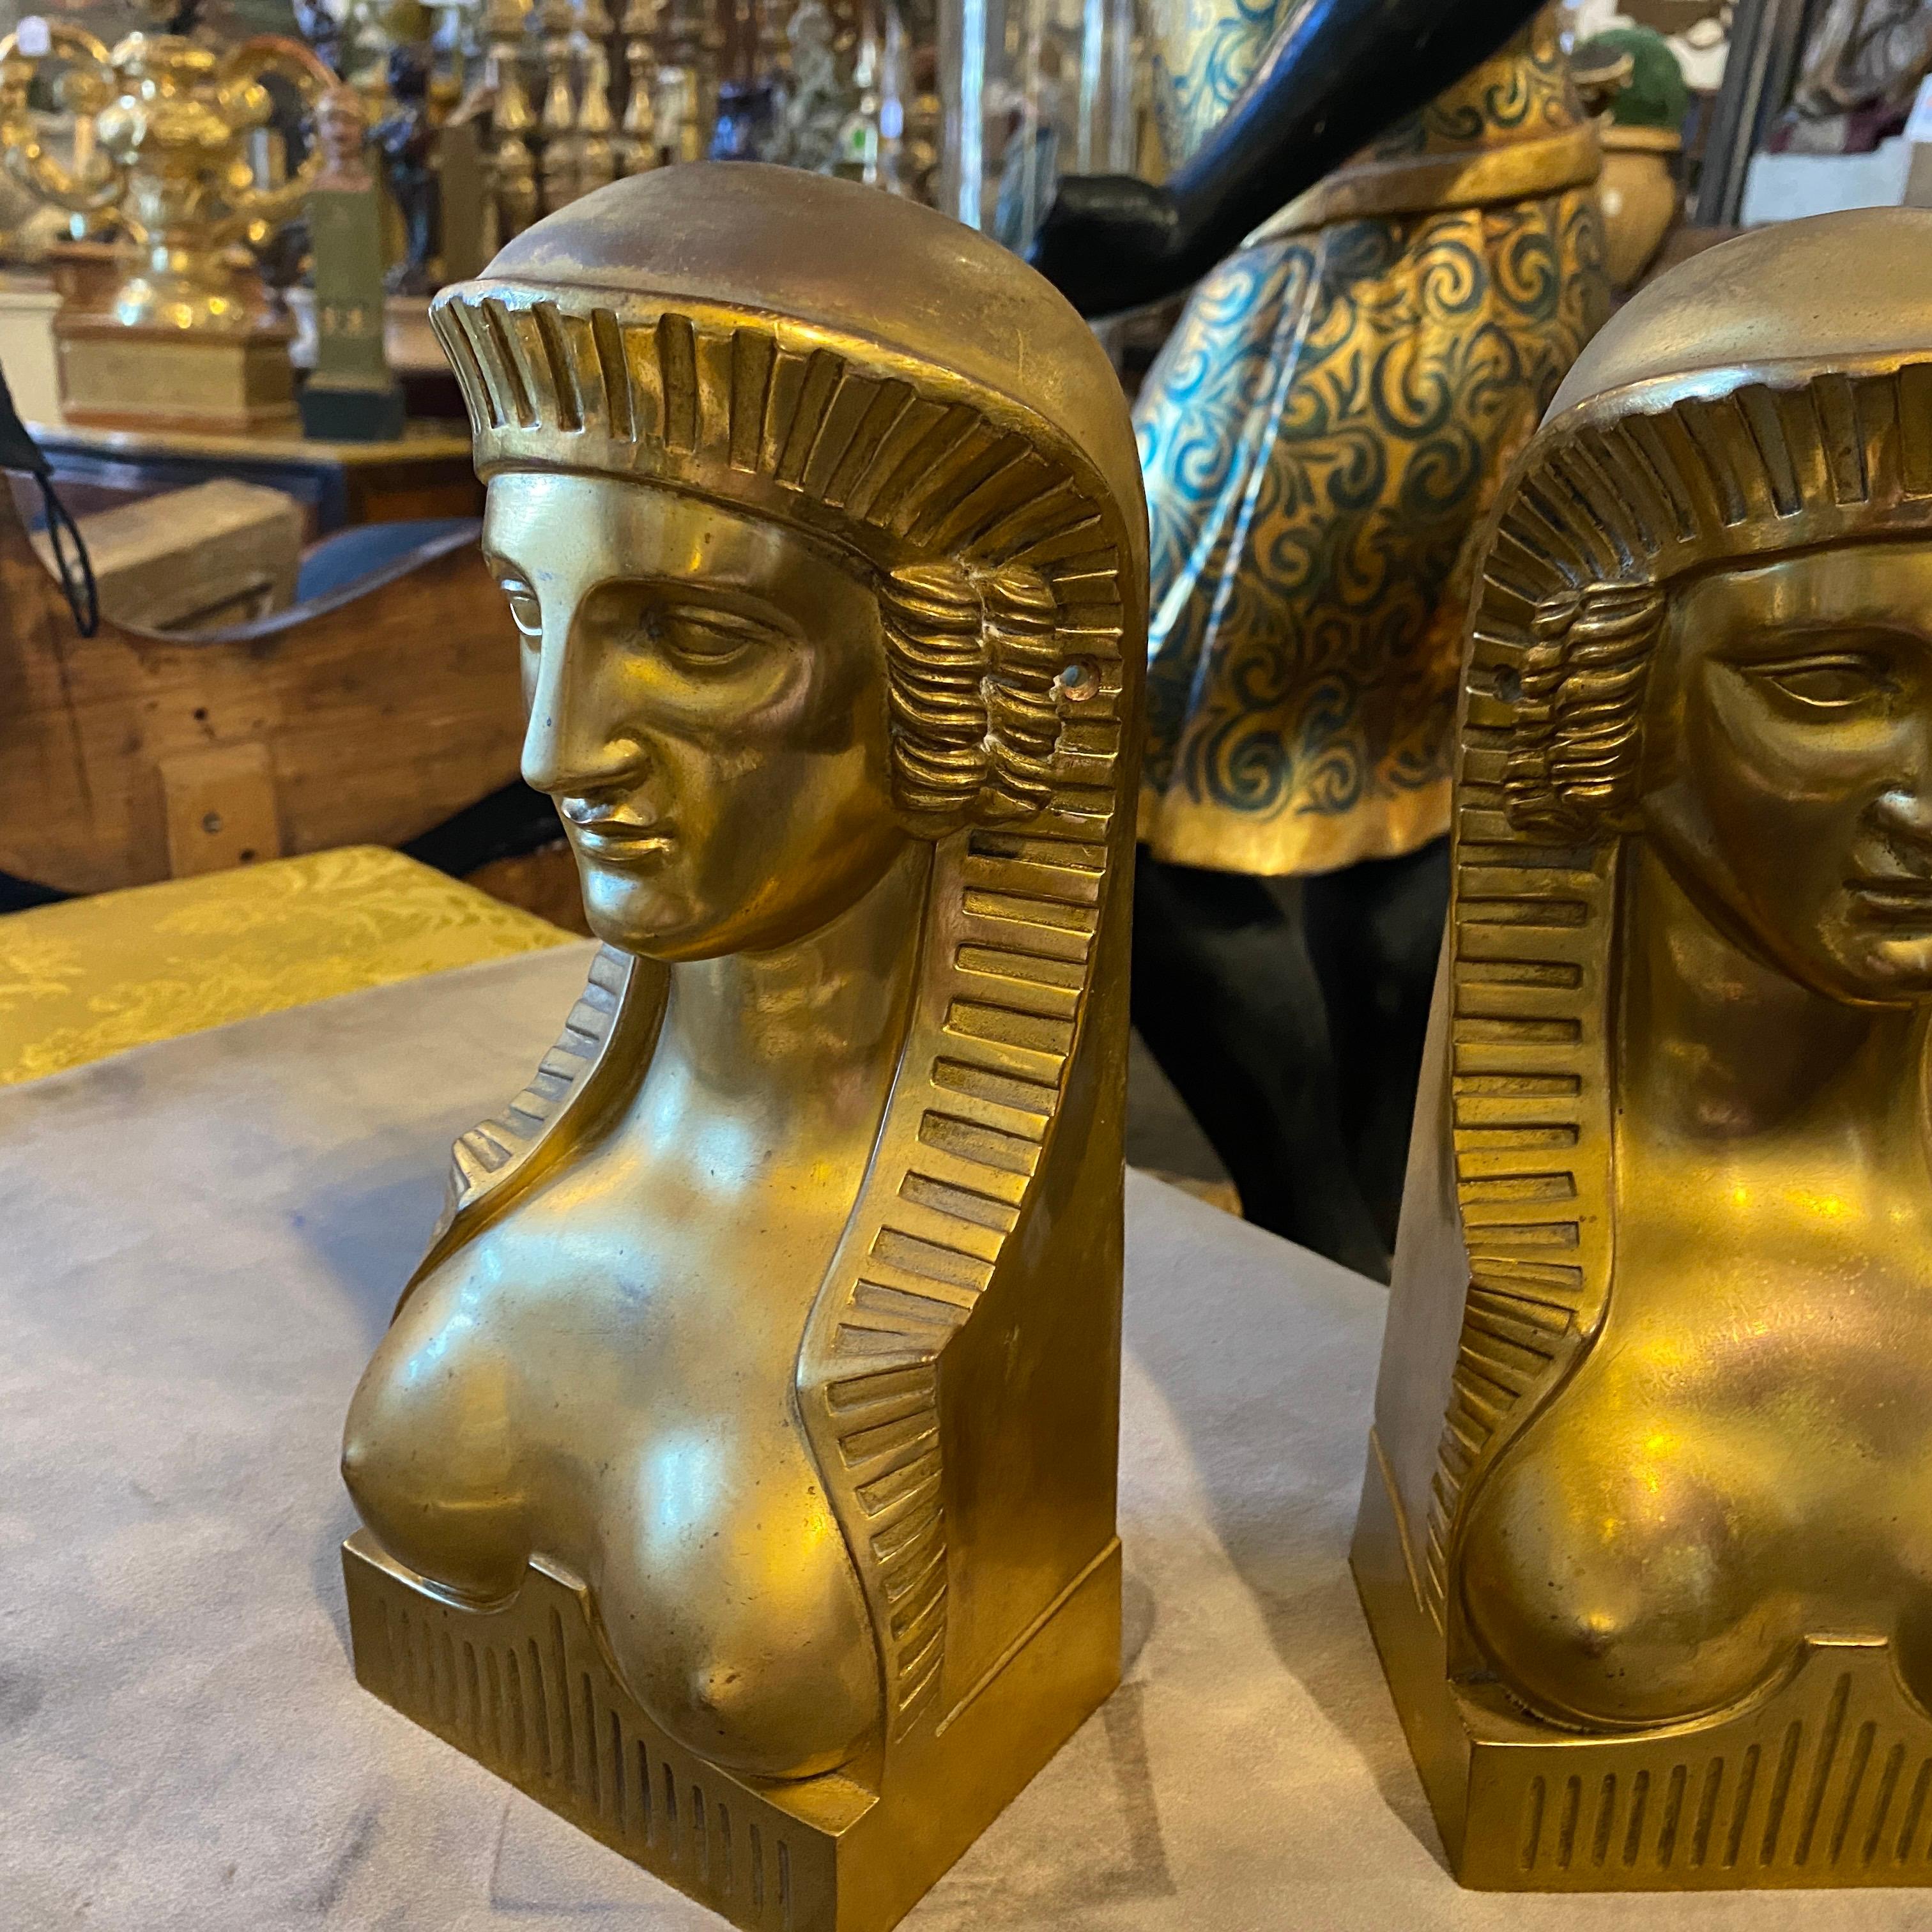 Amazing pair of gilded bronze figures, probably they were mounted on a very big furniture. They can be used as bookends or decorative elements.